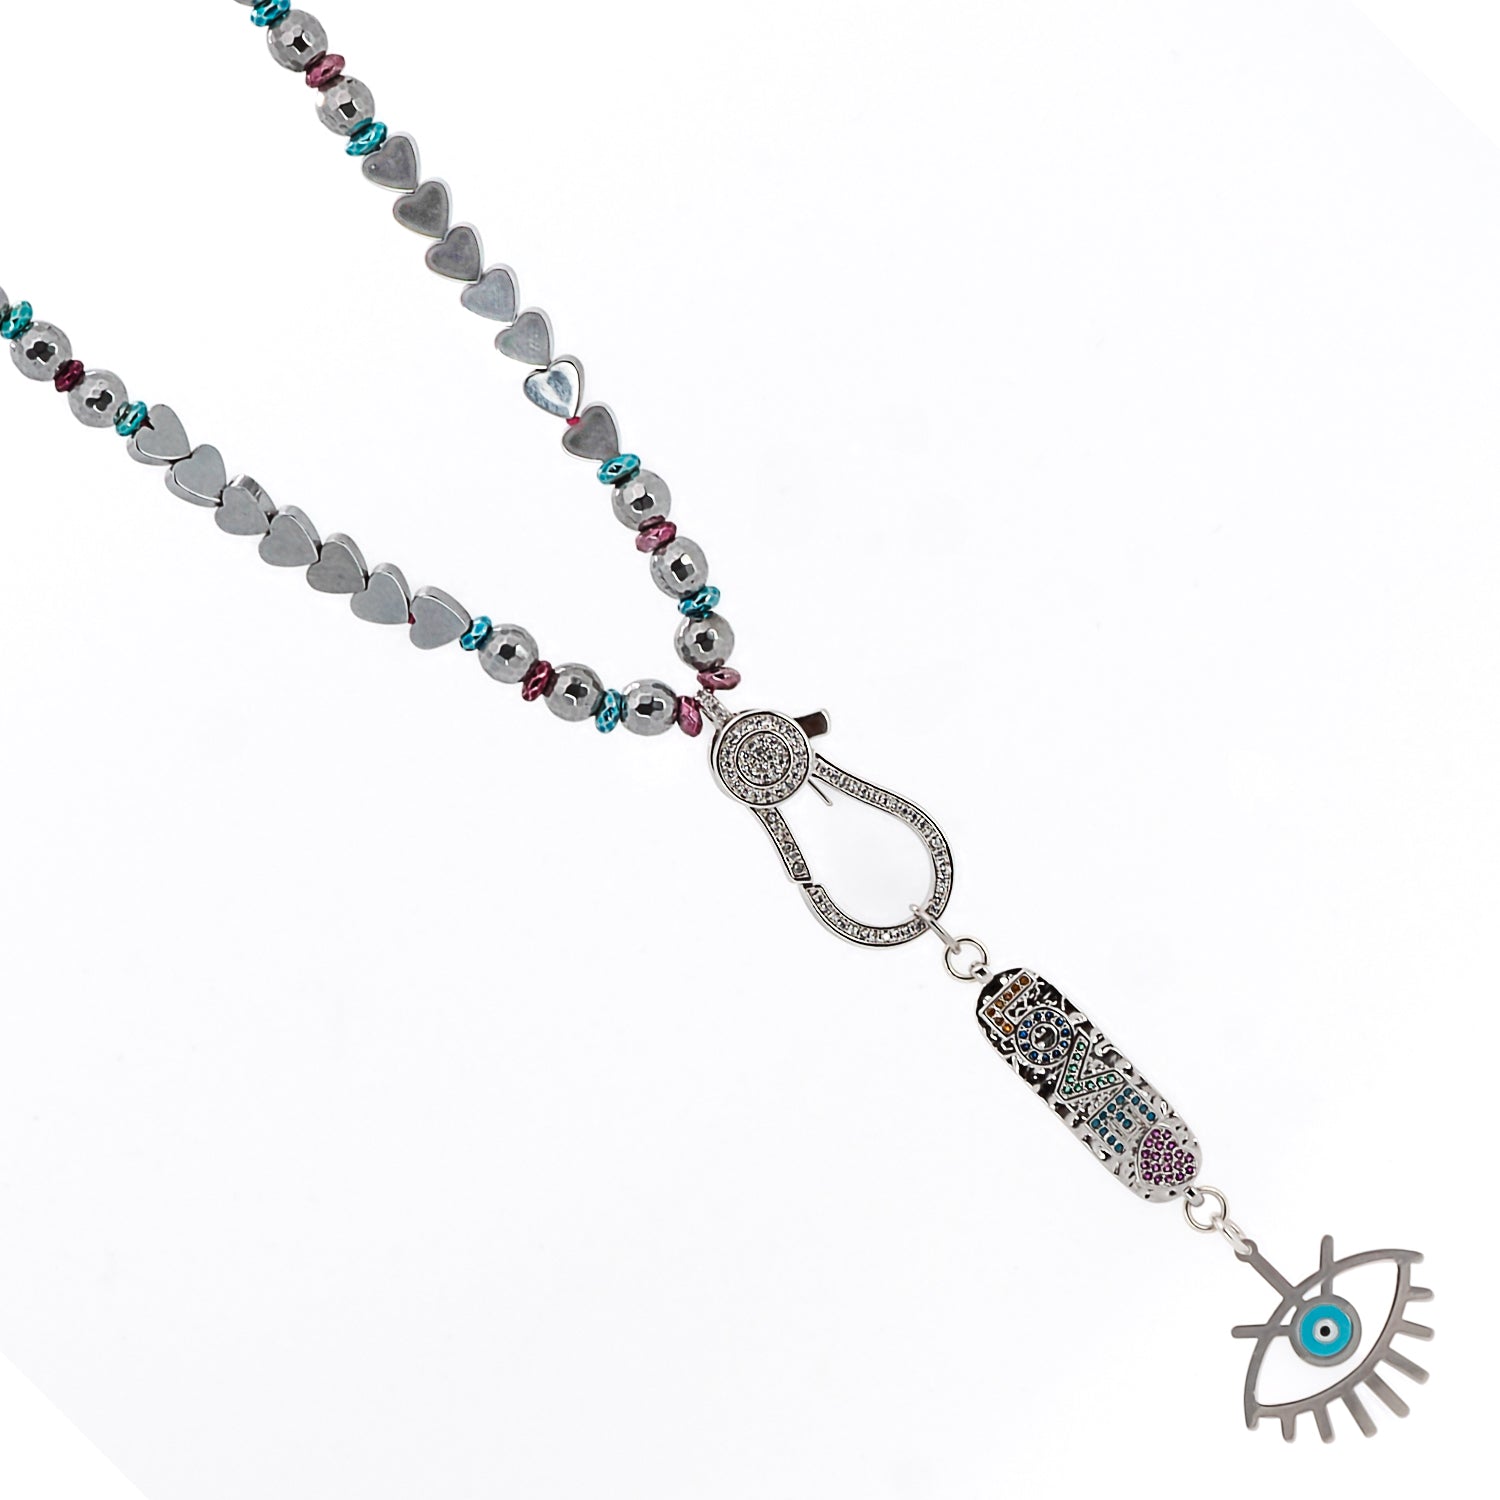 Necklace featuring silver heart beads and a meaningful evil eye charm